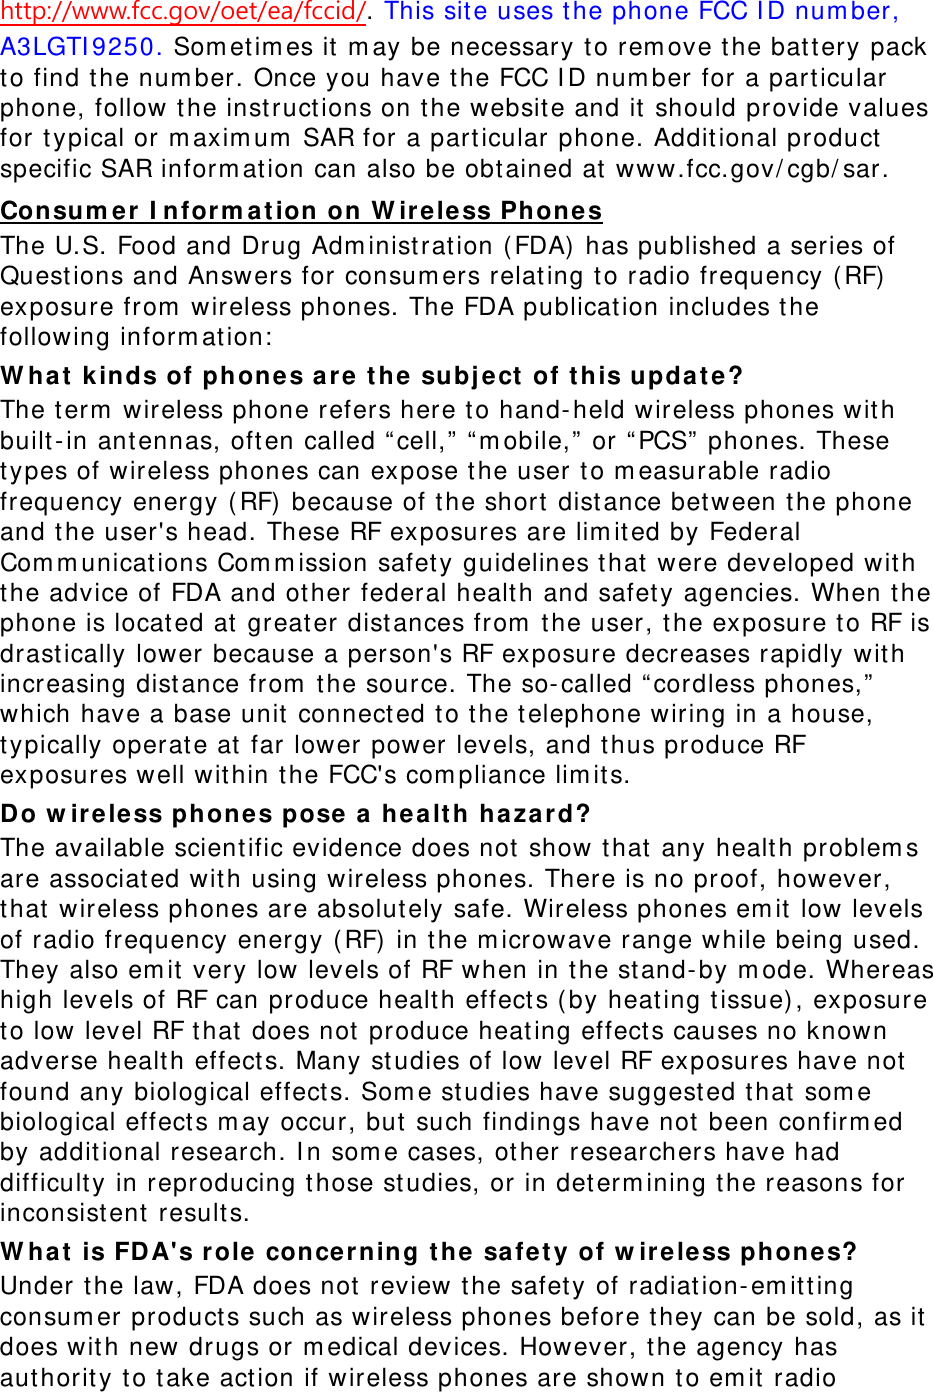 http://www.fcc.gov/oet/ea/fccid/. This sit e uses t he phone FCC I D num ber, A3LGTI 9250. Som et im es it m ay be necessary t o rem ove the bat tery pack to find t he num ber. Once you have the FCC I D num ber for a particular phone, follow t he inst ruct ions on t he website and it  should provide values for t ypical or m axim um  SAR for a particular phone. Addit ional product  specific SAR inform at ion can also be obt ained at  www.fcc.gov/ cgb/ sar. Consu m er I nfor m a t ion on W ir e le ss Phone s The U.S. Food and Drug Adm inist ration (FDA)  has published a series of Quest ions and Answers for consum ers relating t o radio frequency ( RF)  exposure from  wireless phones. The FDA publicat ion includes t he following inform at ion:  W hat  k inds of phones a r e t he subj ect  of t his updat e? The t erm  wireless phone refers here t o hand- held wireless phones wit h built- in antennas, oft en called “ cell,” “ m obile,”  or “ PCS”  phones. These types of wireless phones can expose t he user to m easurable radio frequency energy ( RF)  because of the short dist ance bet ween t he phone and t he user&apos;s head. These RF exposures are lim it ed by Federal Com m unications Com m ission safet y guidelines t hat  were developed wit h the advice of FDA and other federal healt h and safet y agencies. When t he phone is locat ed at  great er dist ances from  t he user, t he exposure t o RF is drast ically lower because a person&apos;s RF exposure decreases rapidly with increasing dist ance from  the source. The so- called “ cordless phones,” which have a base unit  connect ed t o the t elephone wiring in a house, typically operate at  far lower power levels, and t hus produce RF exposures well wit hin t he FCC&apos;s com pliance lim it s. Do w ir e le ss phone s pose a  hea lt h h a zard? The available scient ific evidence does not  show t hat  any health problem s are associated wit h using wireless phones. There is no proof, however, that  wireless phones are absolutely safe. Wireless phones em it low levels of radio frequency energy ( RF) in t he m icrowave range while being used. They also em it  very low levels of RF when in t he st and- by m ode. Whereas high levels of RF can produce healt h effect s (by heat ing t issue) , exposure to low level RF t hat  does not  produce heat ing effects causes no known adverse healt h effect s. Many st udies of low level RF exposures have not found any biological effect s. Som e st udies have suggested t hat  som e biological effect s m ay occur, but such findings have not  been confirm ed by addit ional research. I n som e cases, ot her researchers have had difficult y in reproducing t hose studies, or in det erm ining t he reasons for inconsist ent result s. W hat  is FD A&apos;s role  conce r ning t he  safet y of w ireless phones? Under t he law, FDA does not  review the safety of radiation- em itt ing consum er product s such as wireless phones before t hey can be sold, as it does with new drugs or m edical devices. However, t he agency has aut horit y t o t ake action if wireless phones are shown to em it radio 